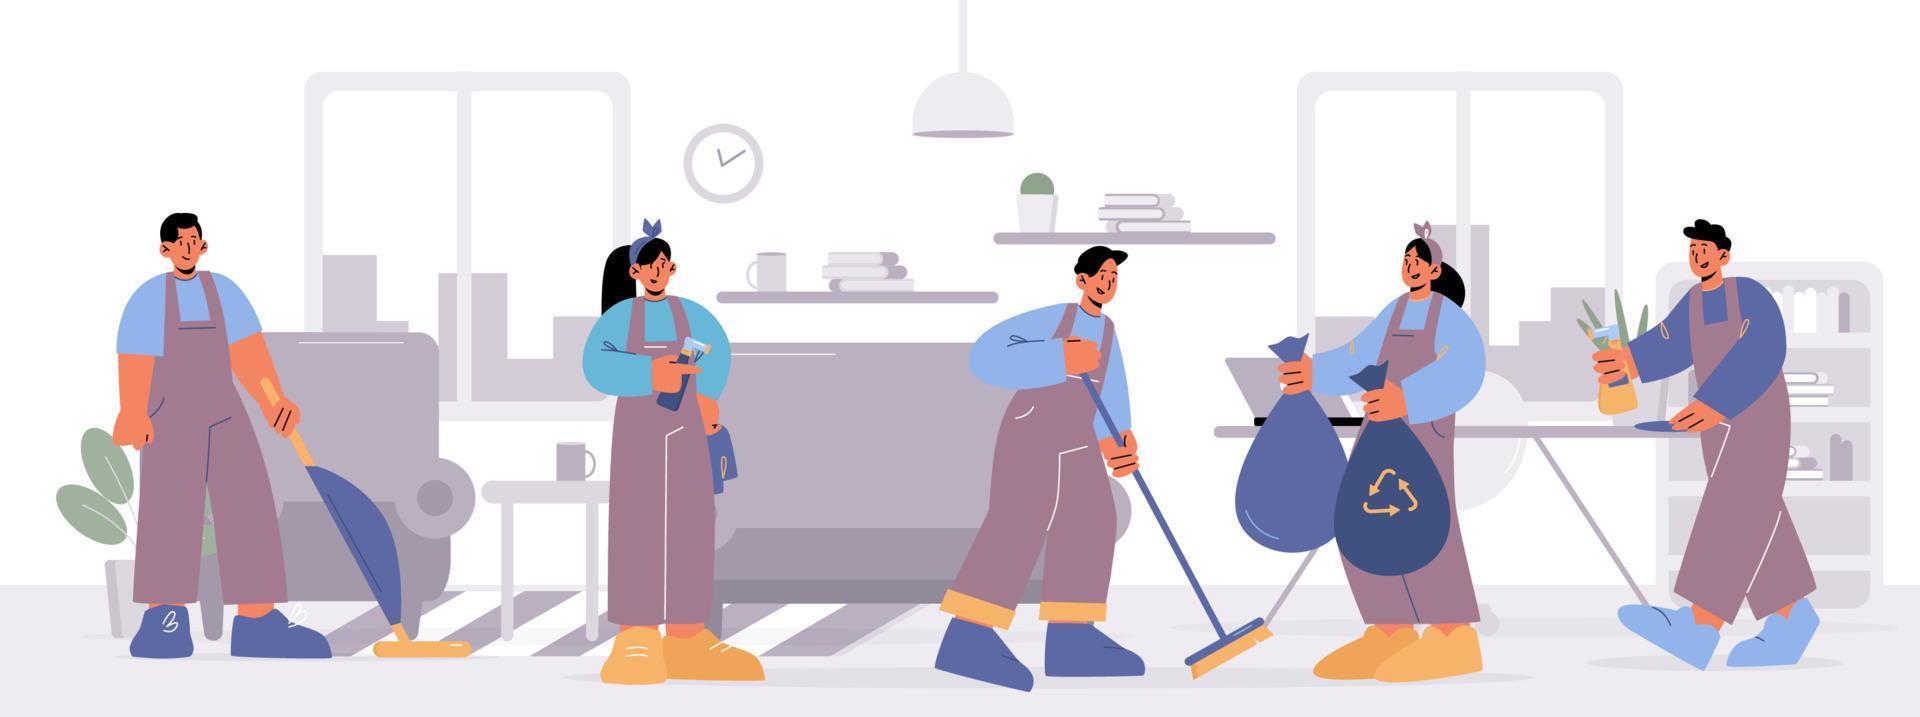 Cleaning service staff work in living room vector